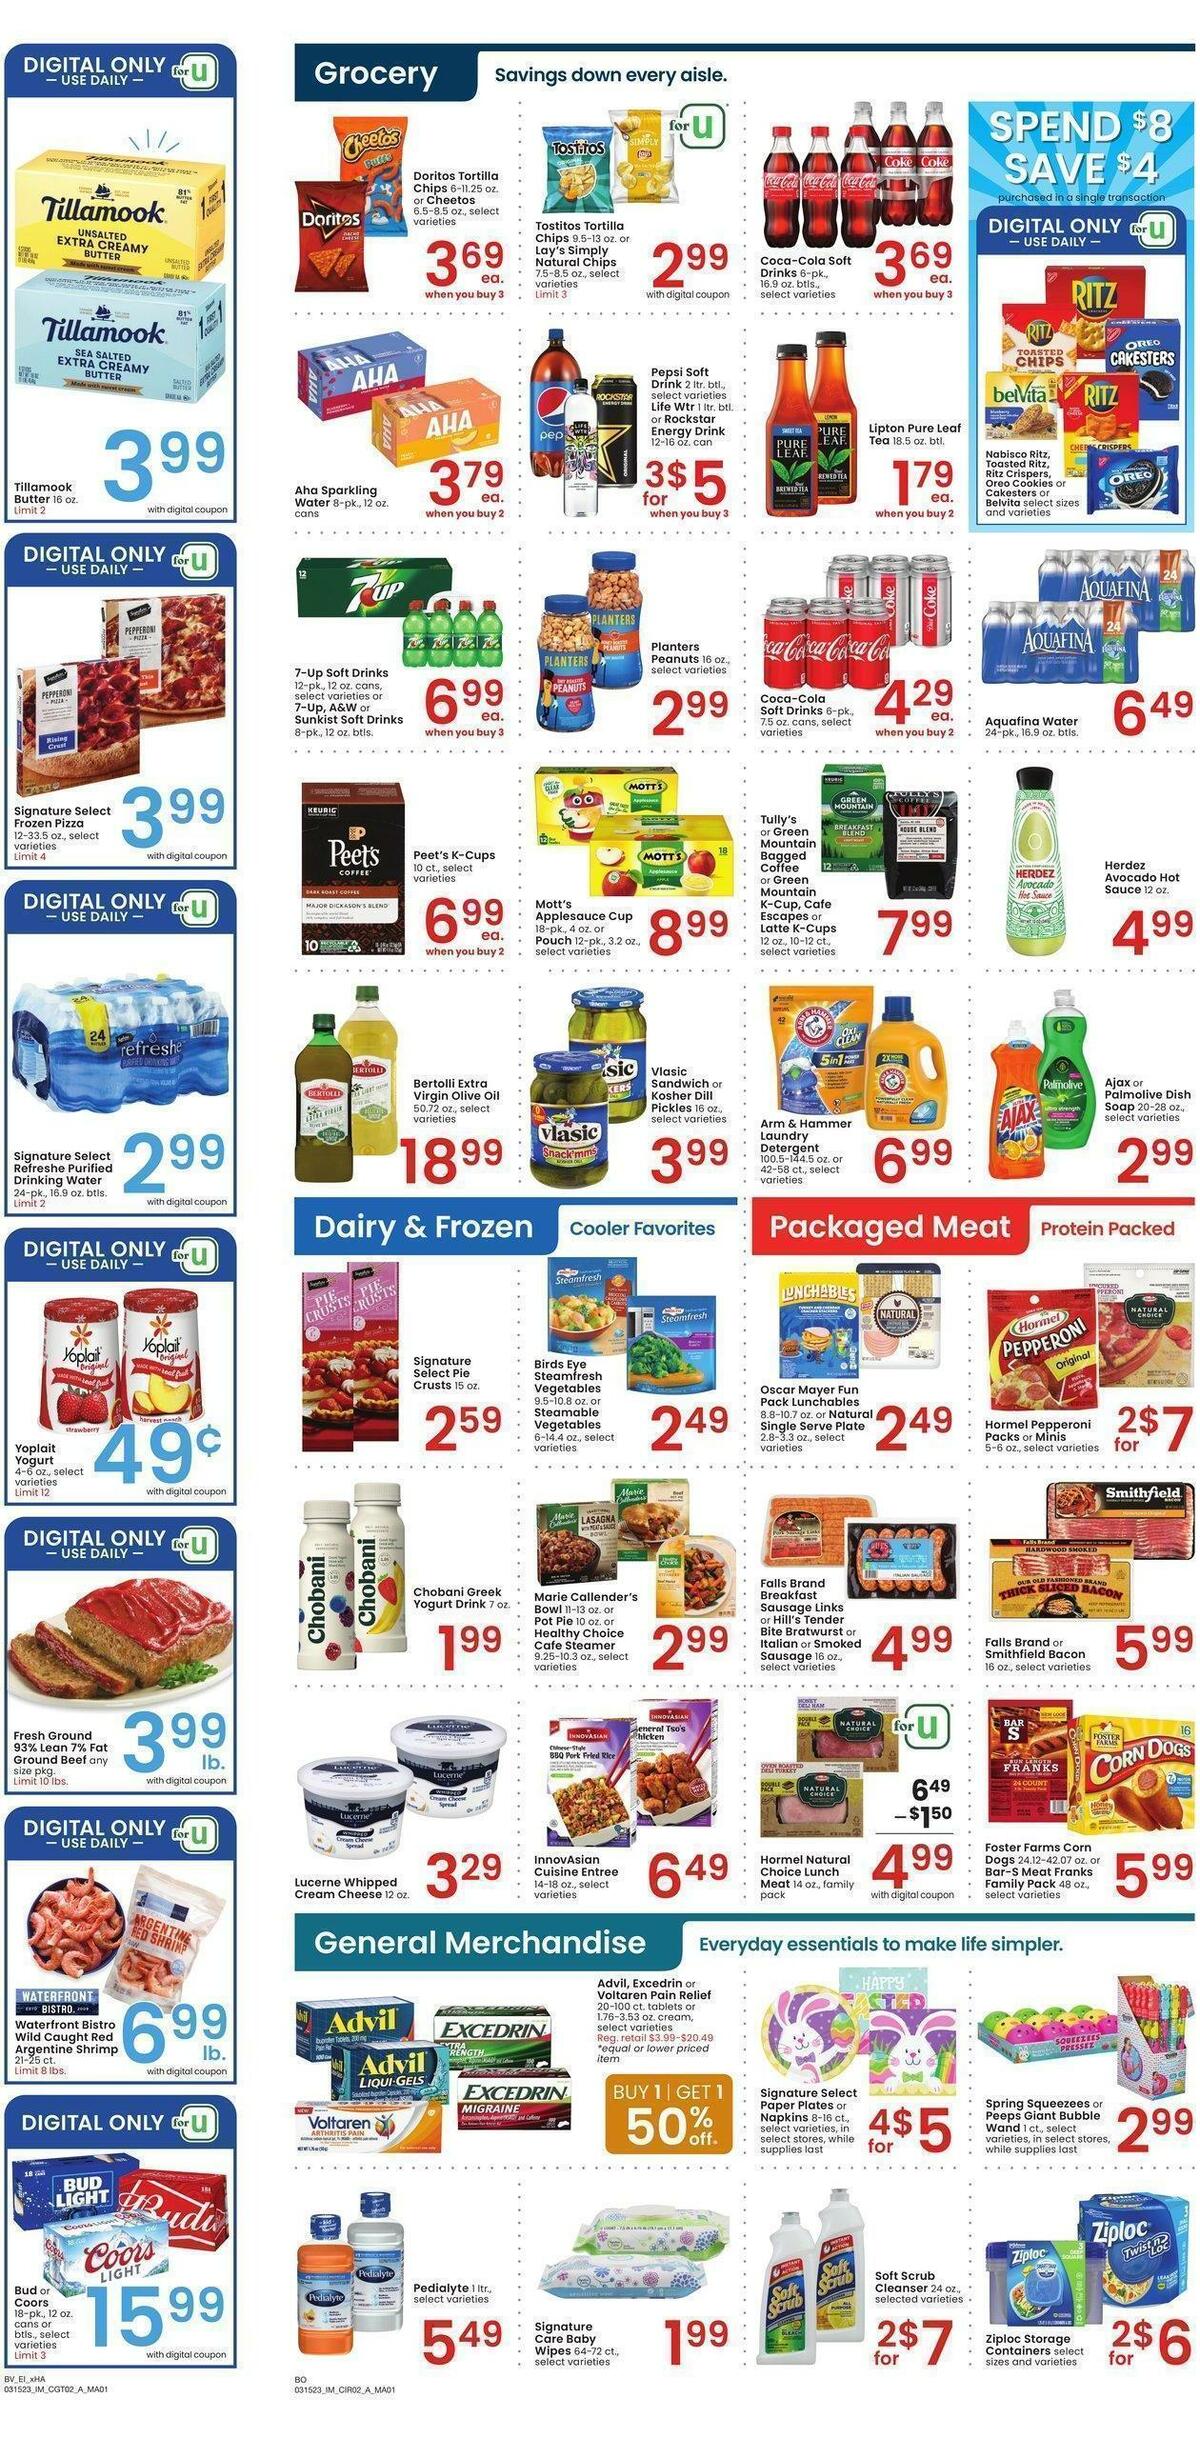 Albertsons Weekly Ad from March 15